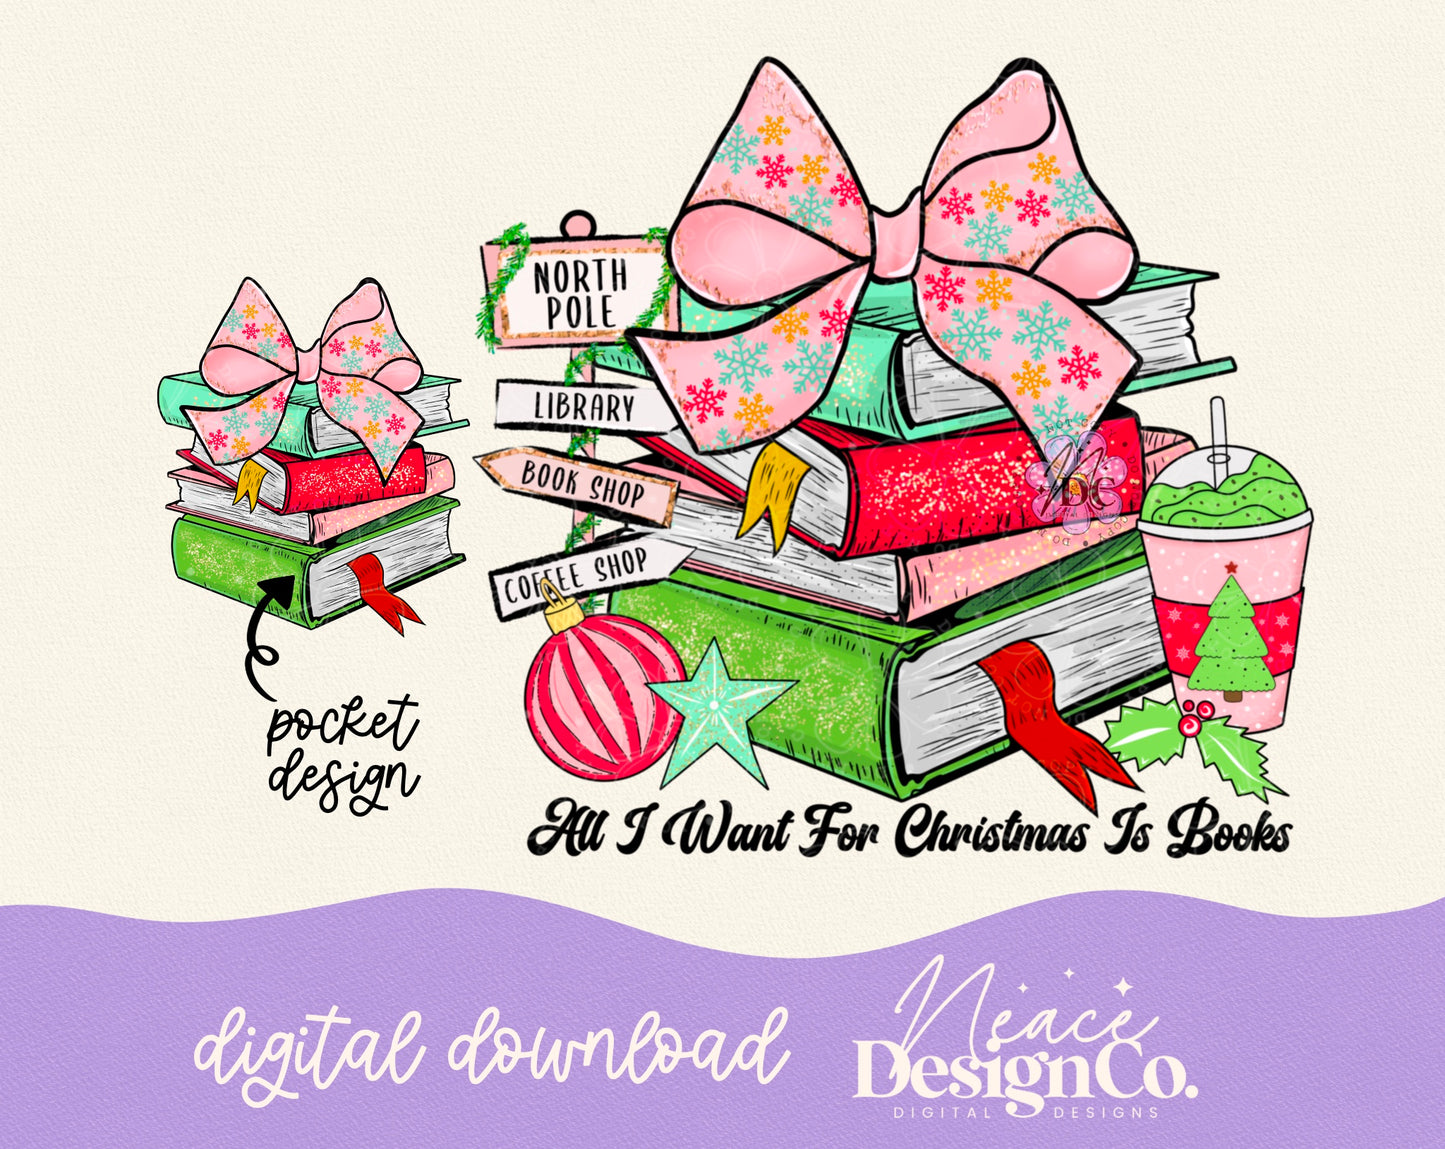 All I Want for Christmas Books w/Pocket Digital PNG